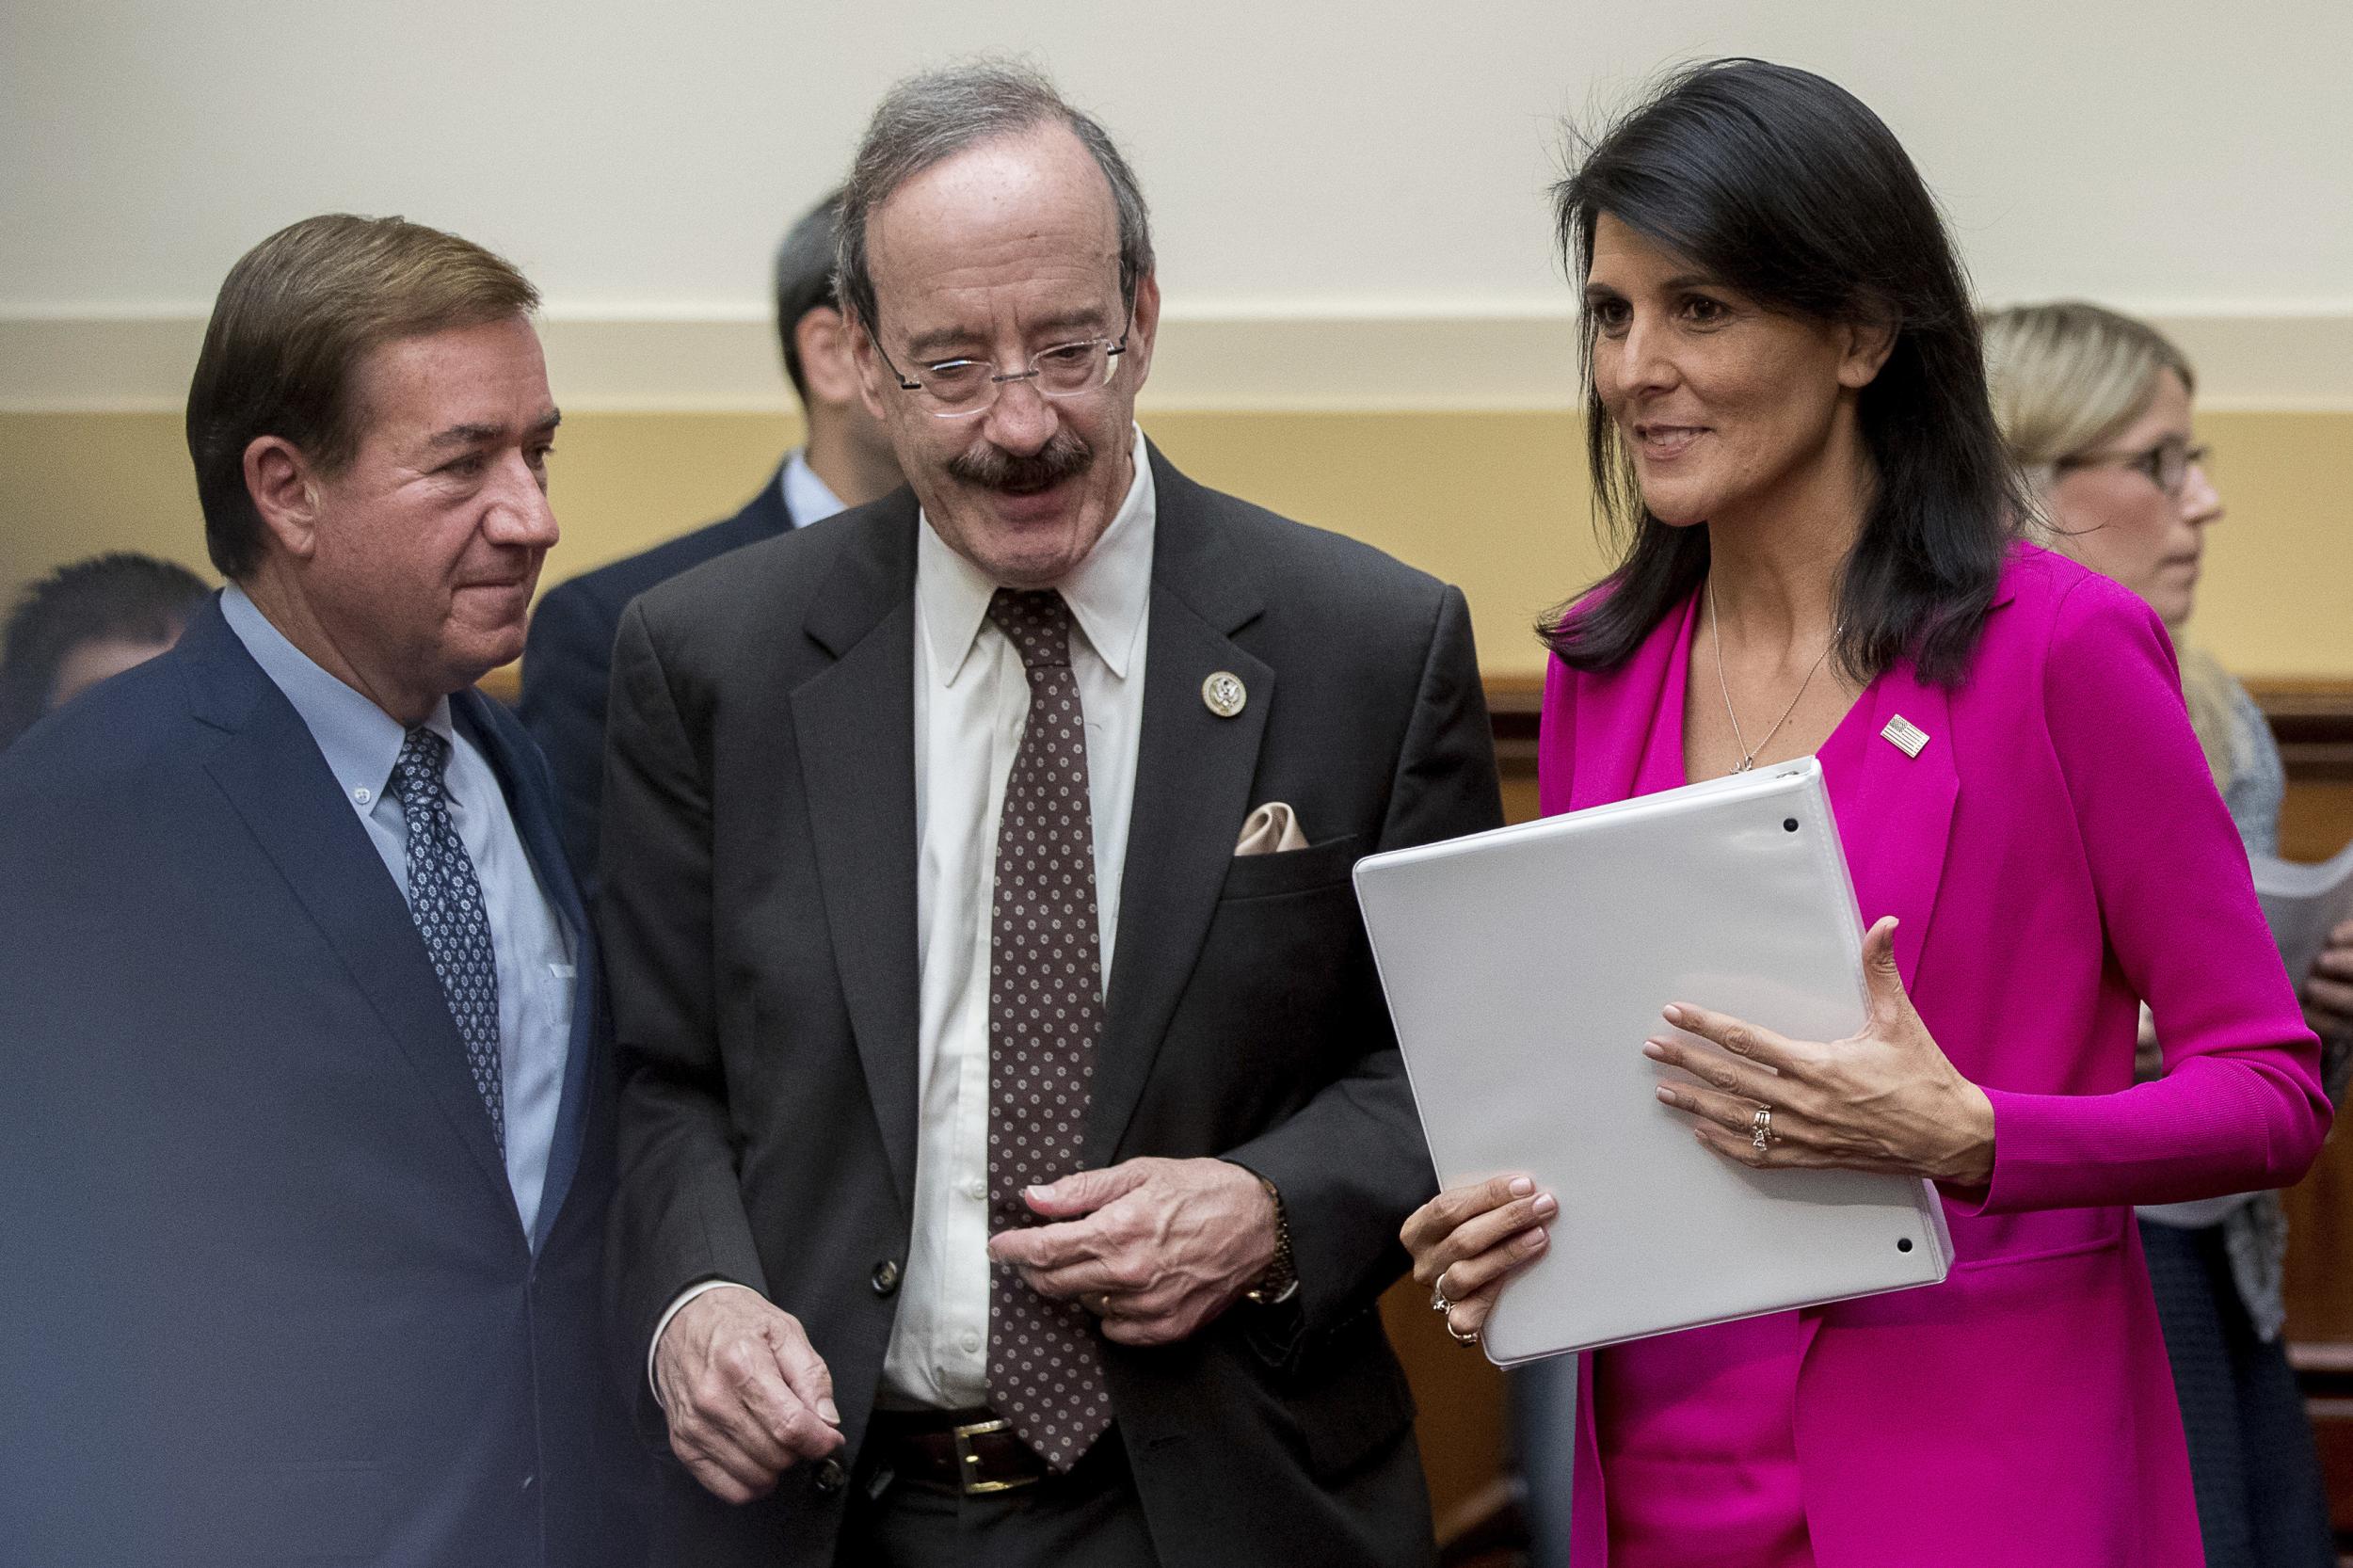 House Foreign Affairs Committee ChairmanEd Royce, the committee's ranking member Eliot Engel and US Ambassador to the UN Nikki Haley arrive on Capitol Hill